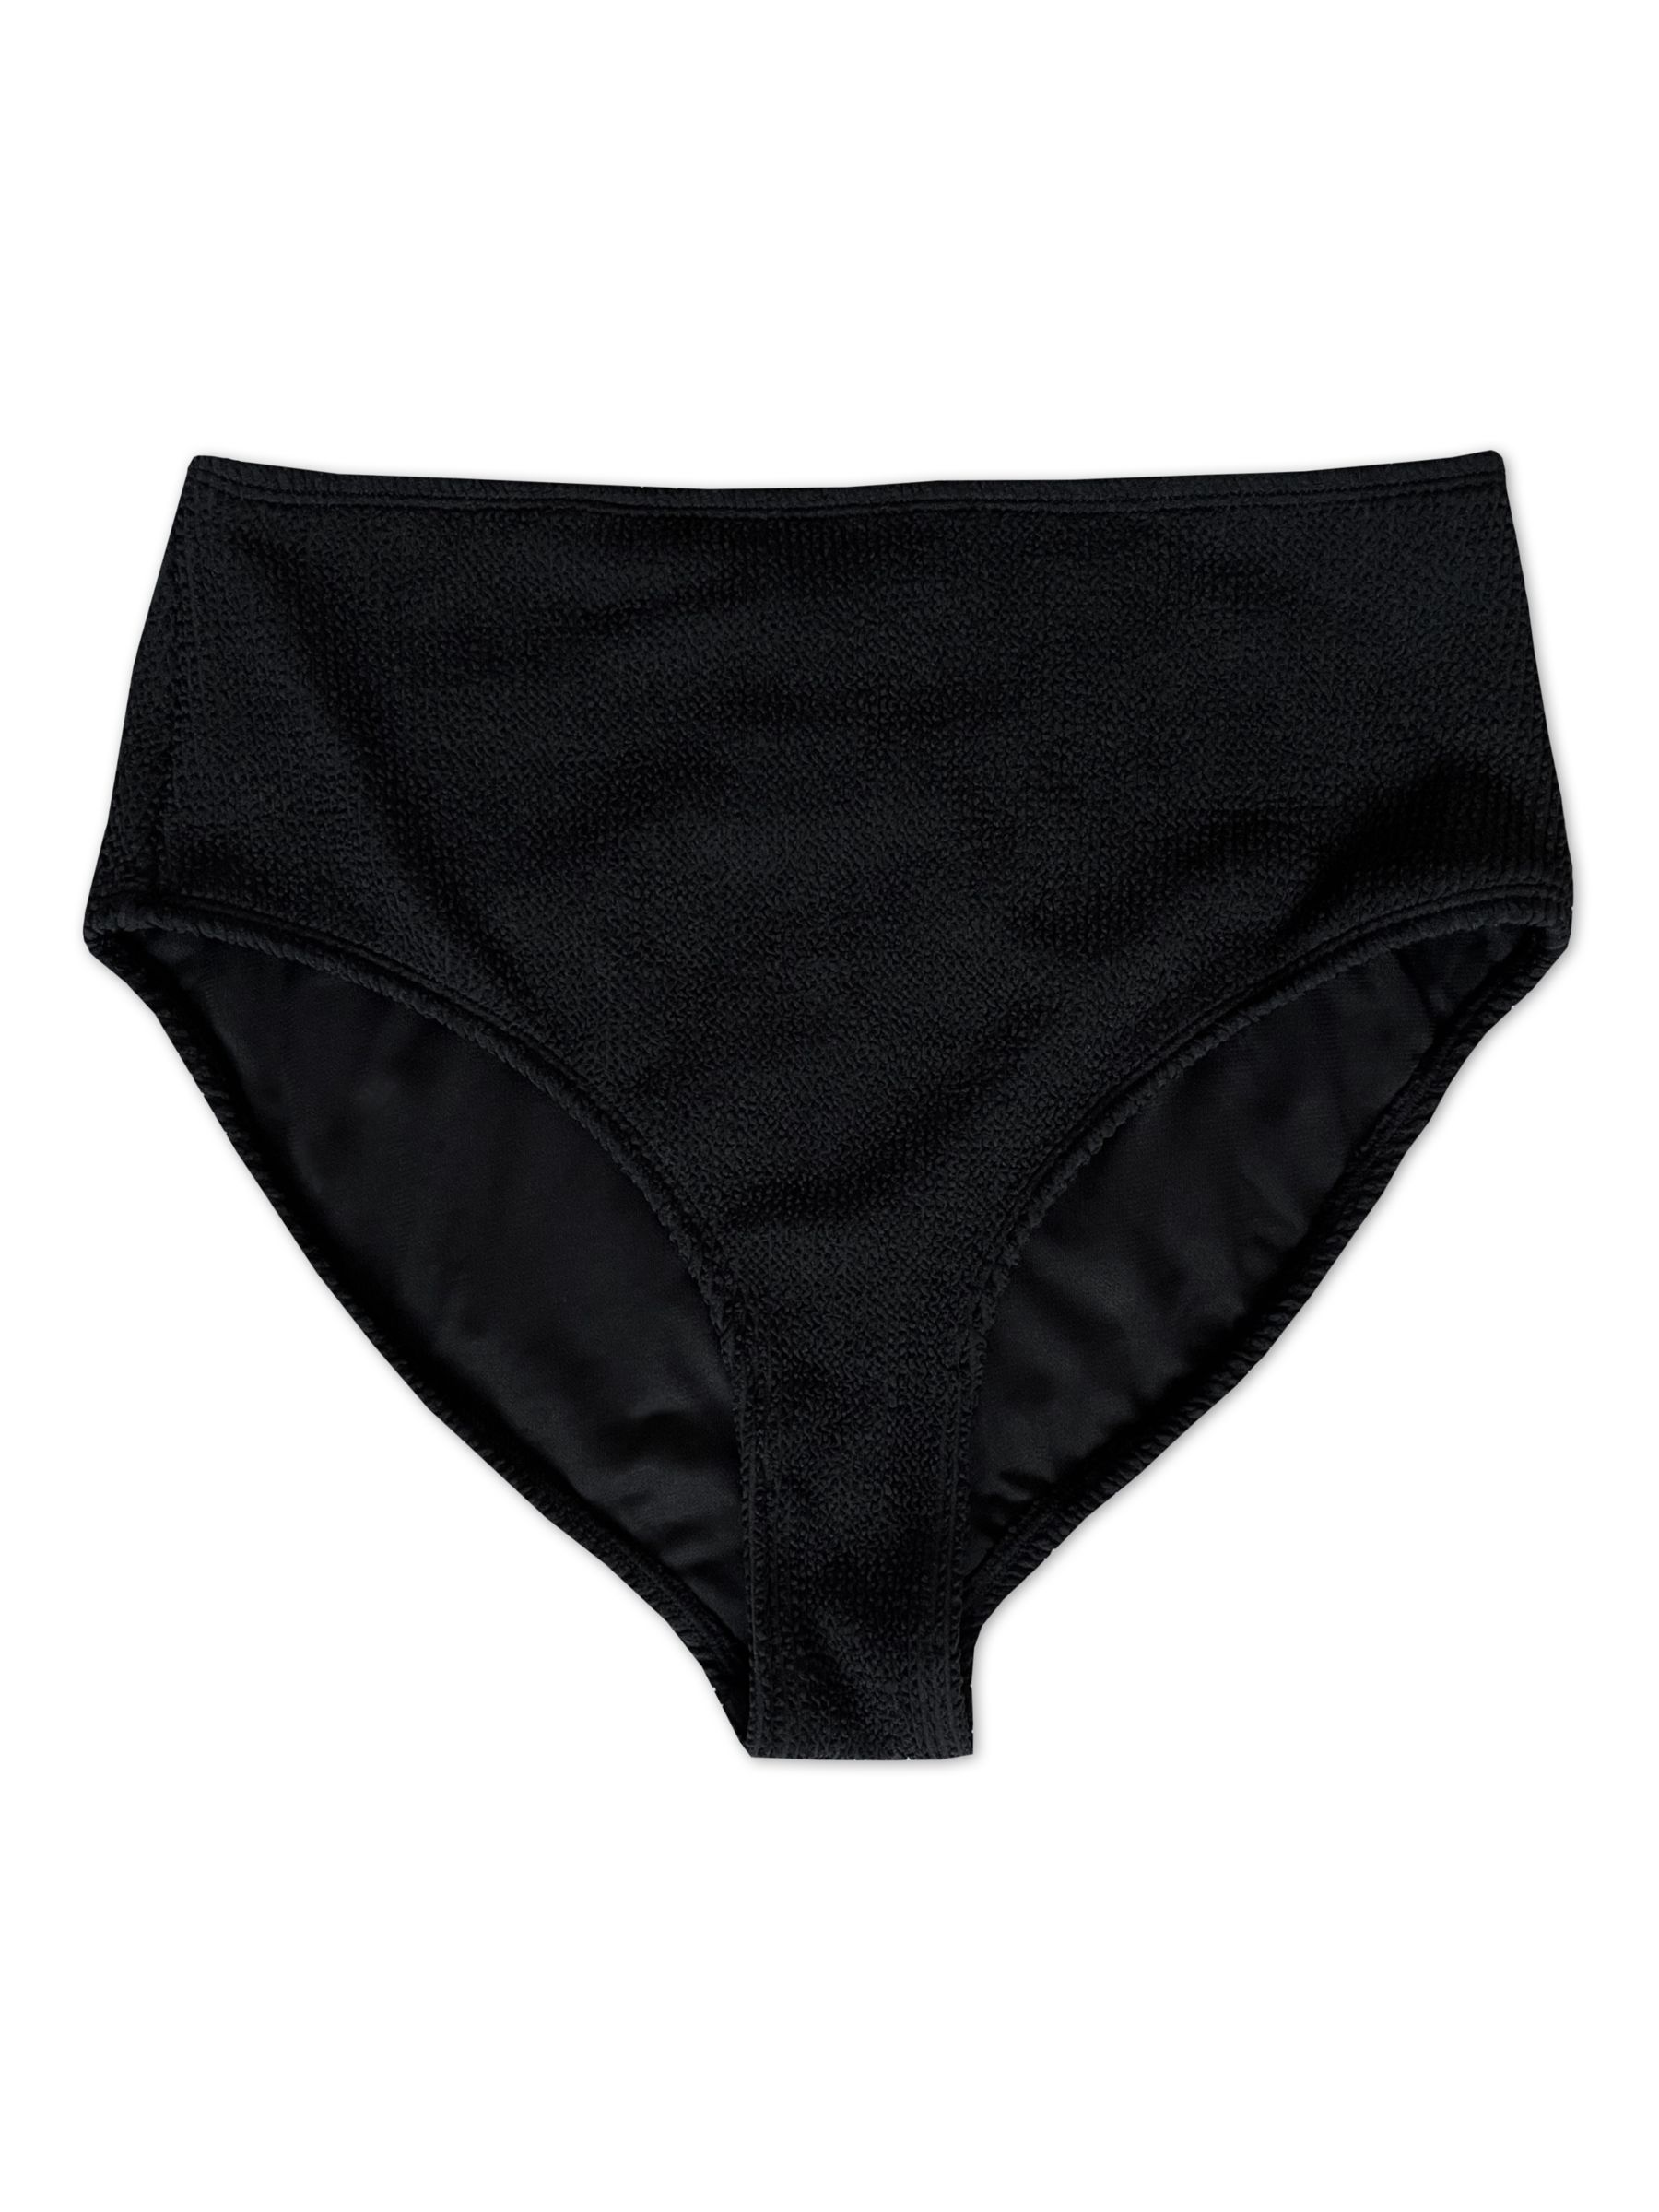 Underwear  Skiny Womens Every Day In Cotton Rib Black • Anointed Tabernacle